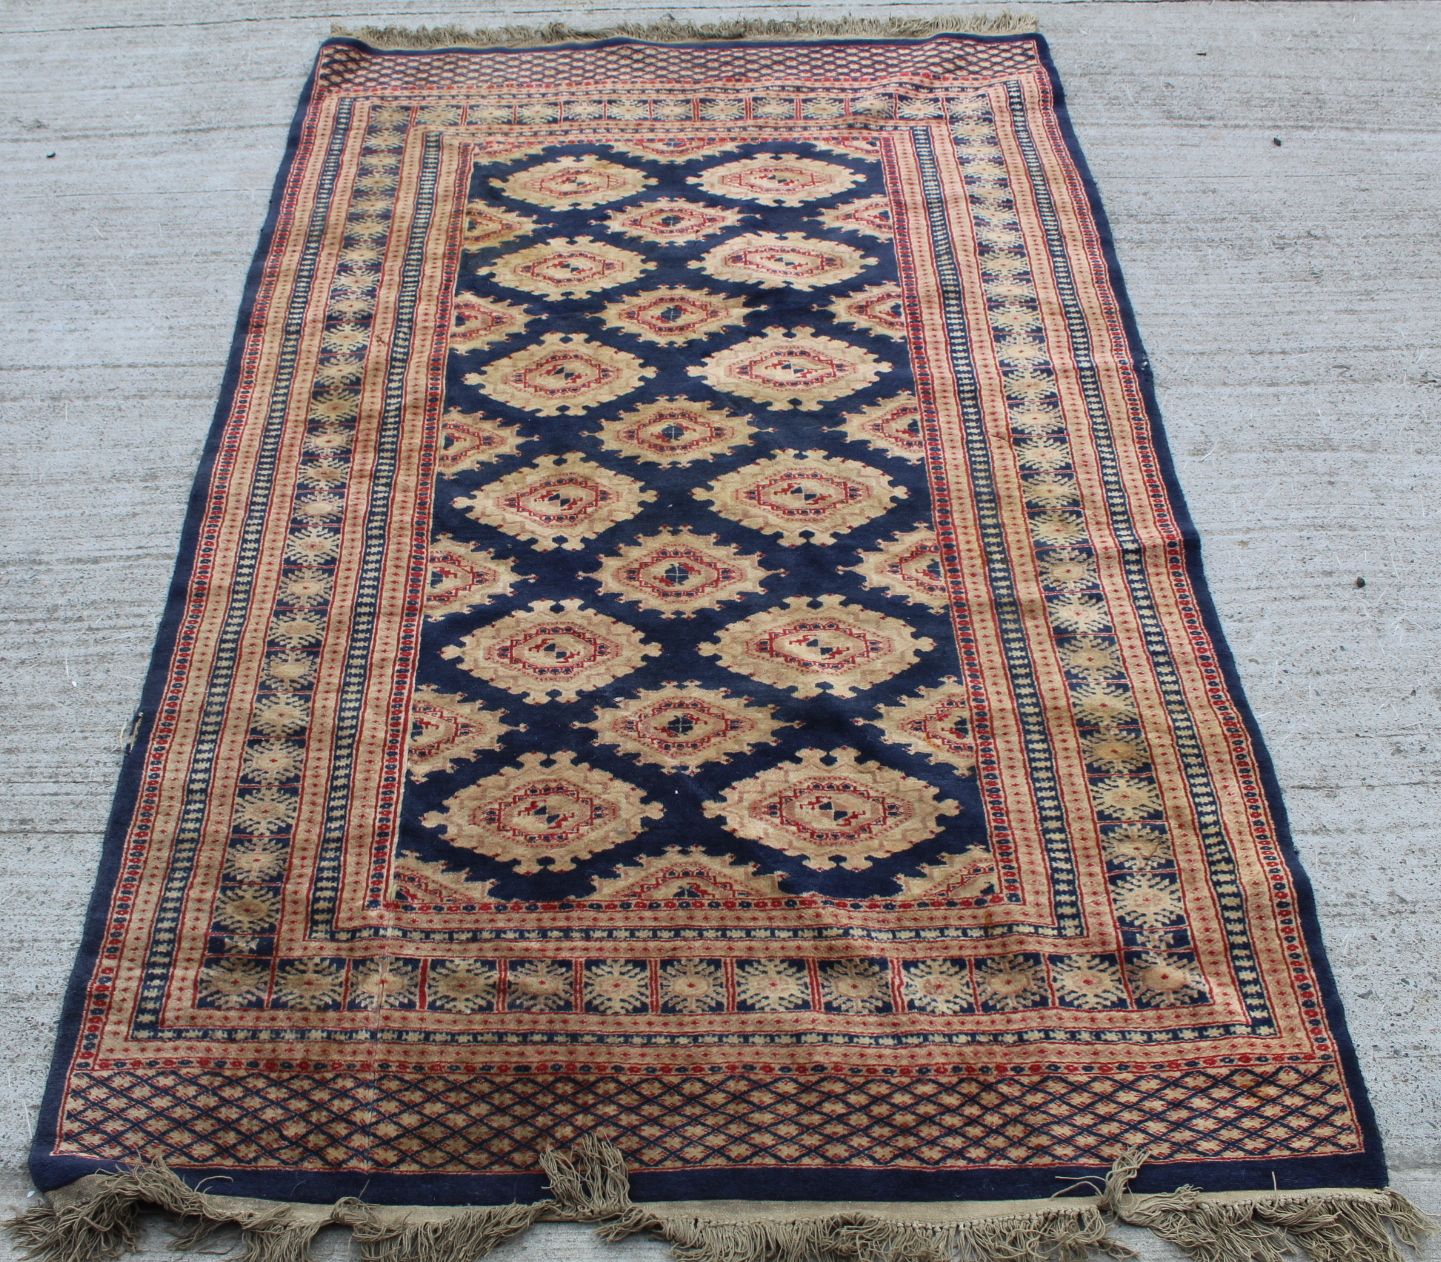 Eastern wool rug with multiple hooked octagonal medallions on blue field, 201cm x 124cm.